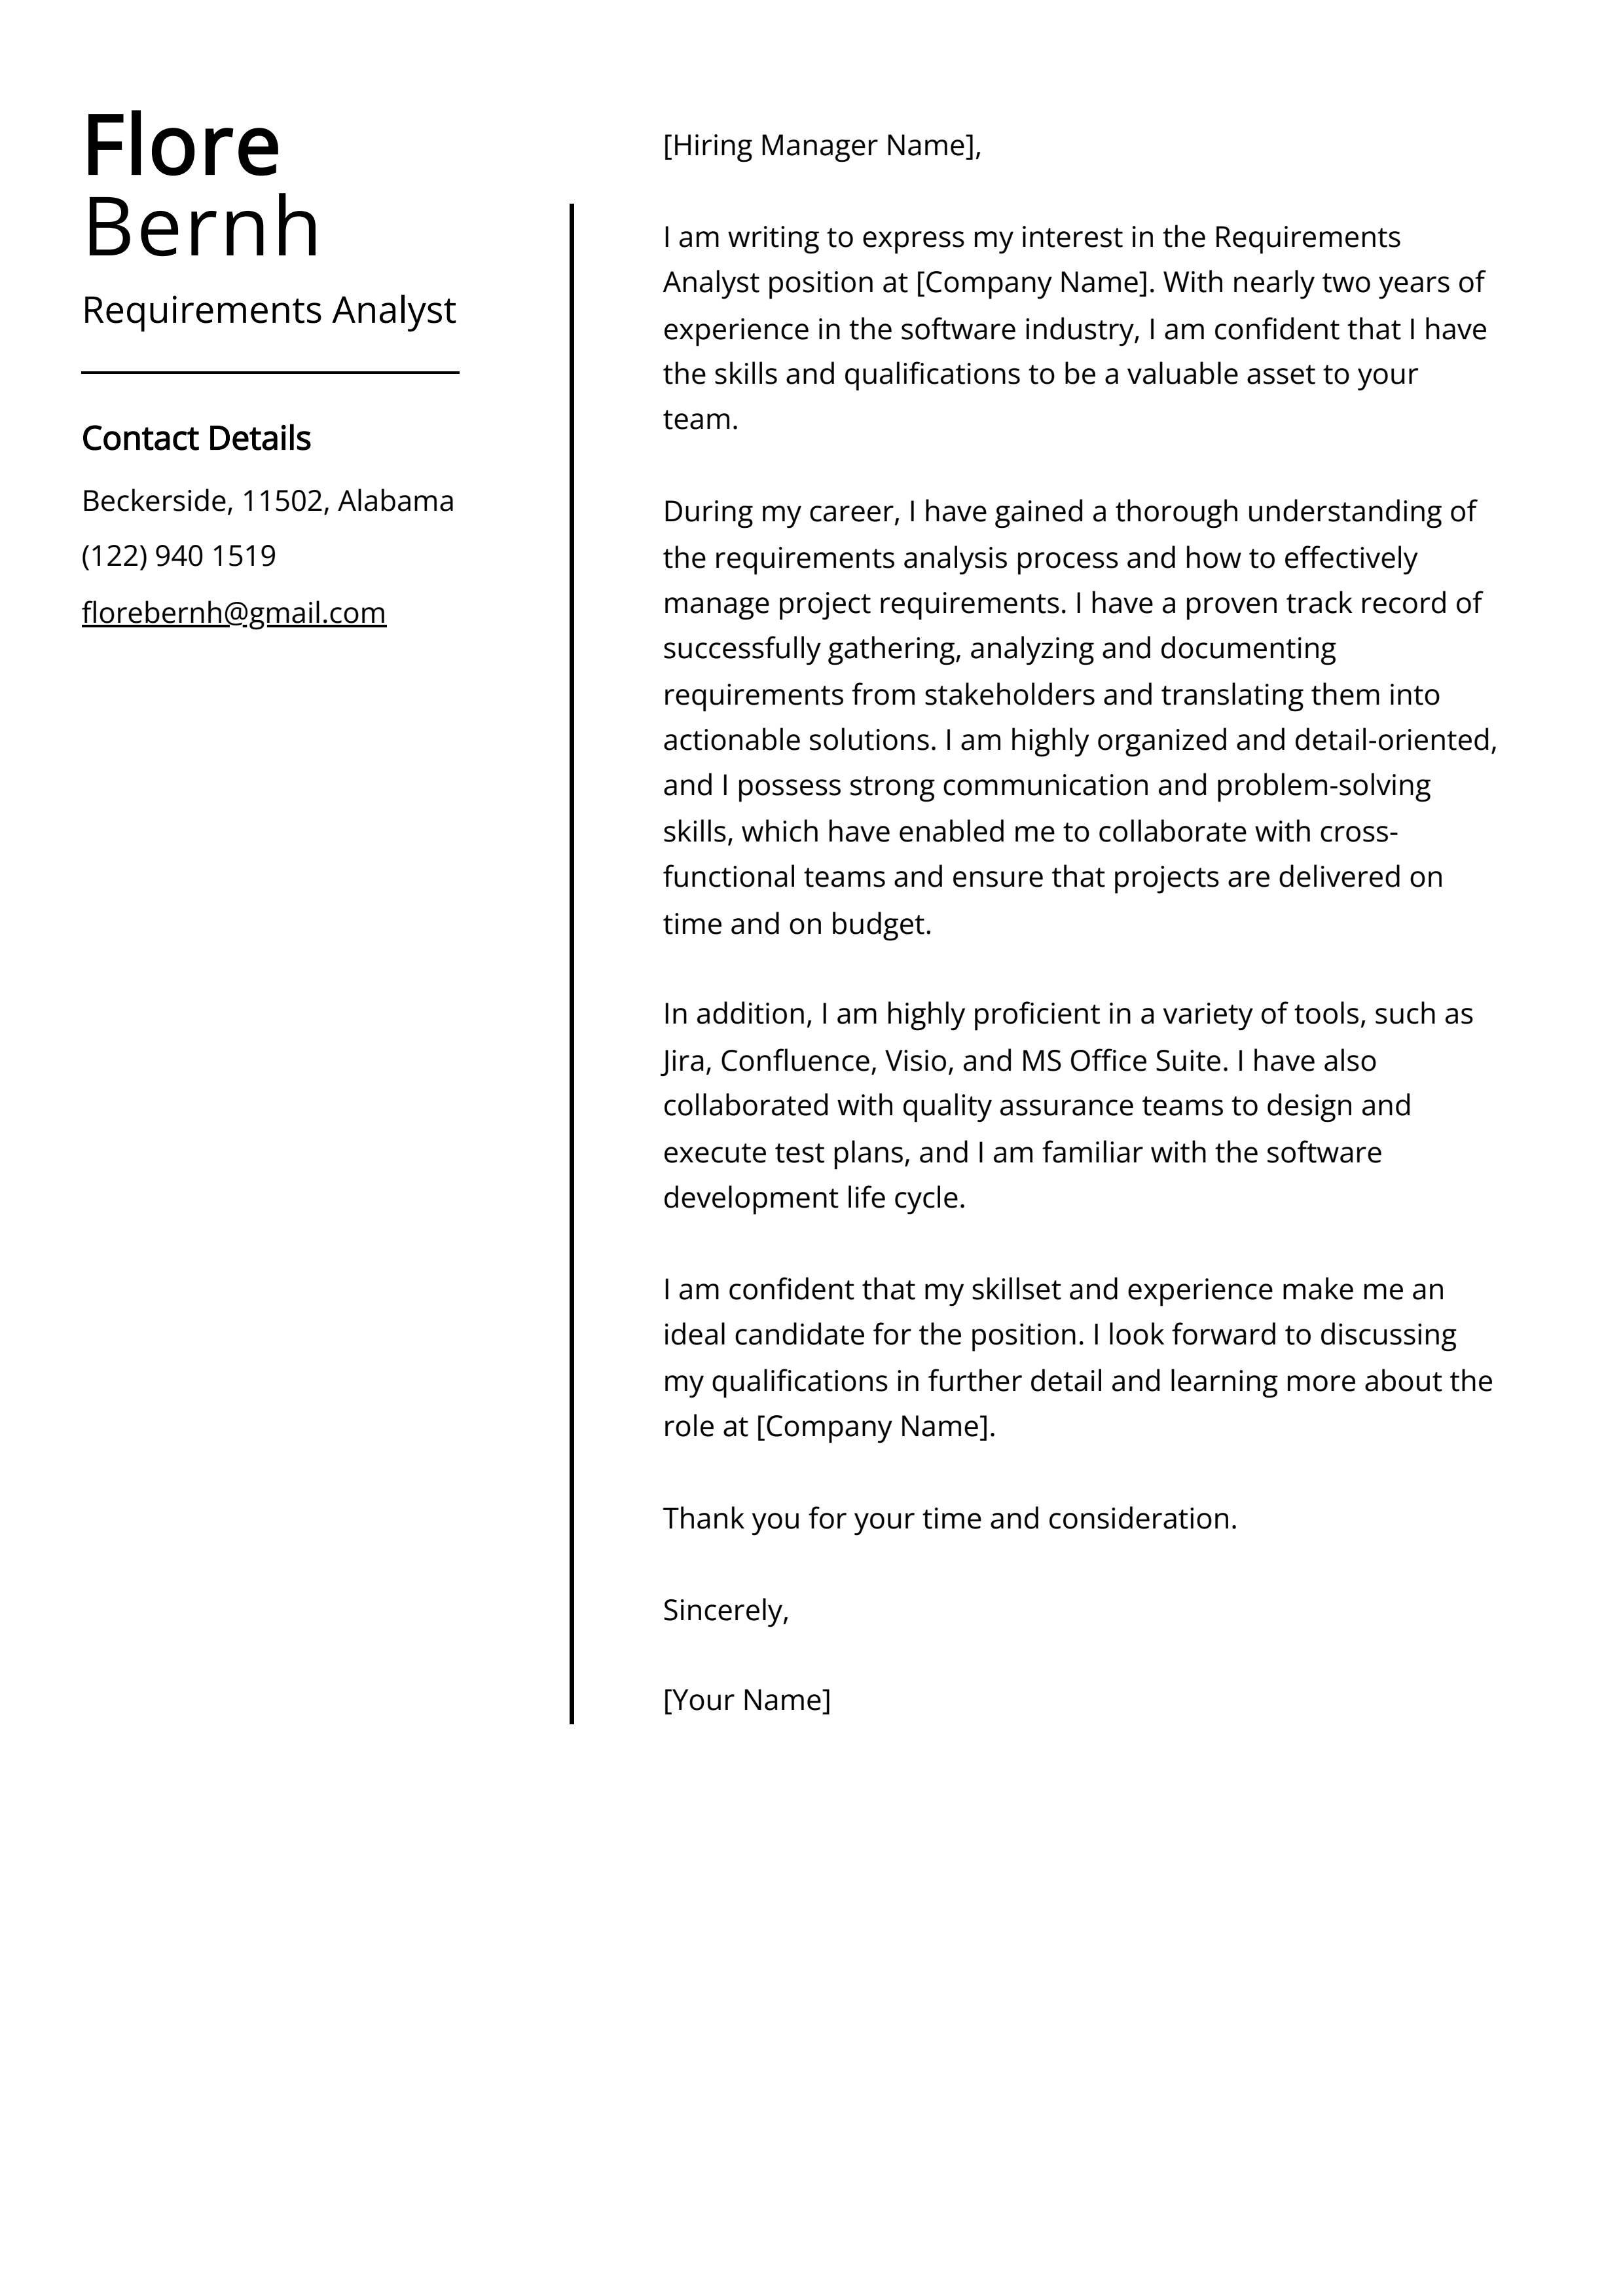 Requirements Analyst Cover Letter Example